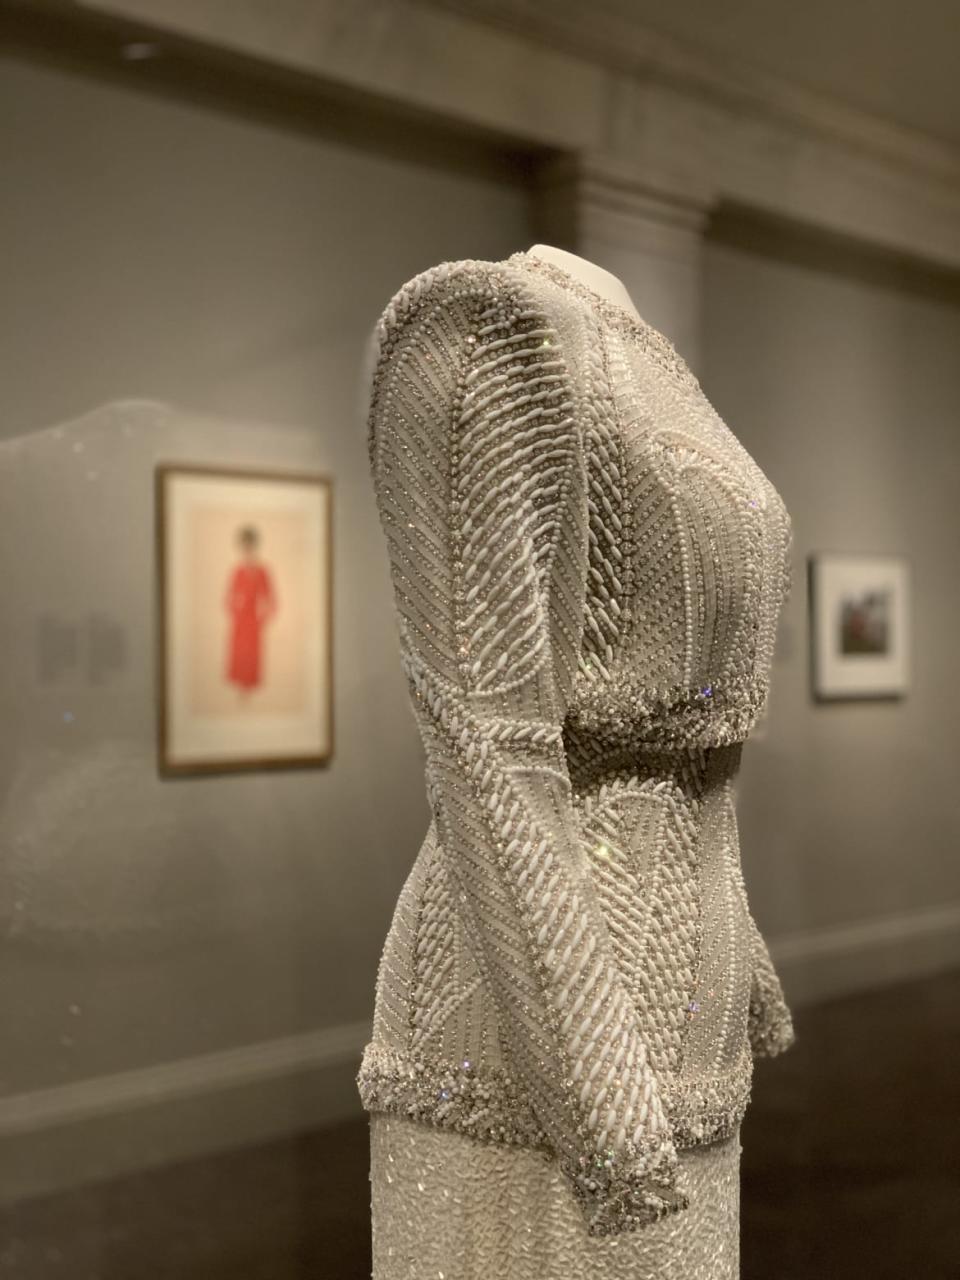 <div class="inline-image__caption"><p>Nancy Reagan’s 1985 inaugural gown by James Galanos.</p></div> <div class="inline-image__credit">Smithsonian’s National Portrait Gallery</div>